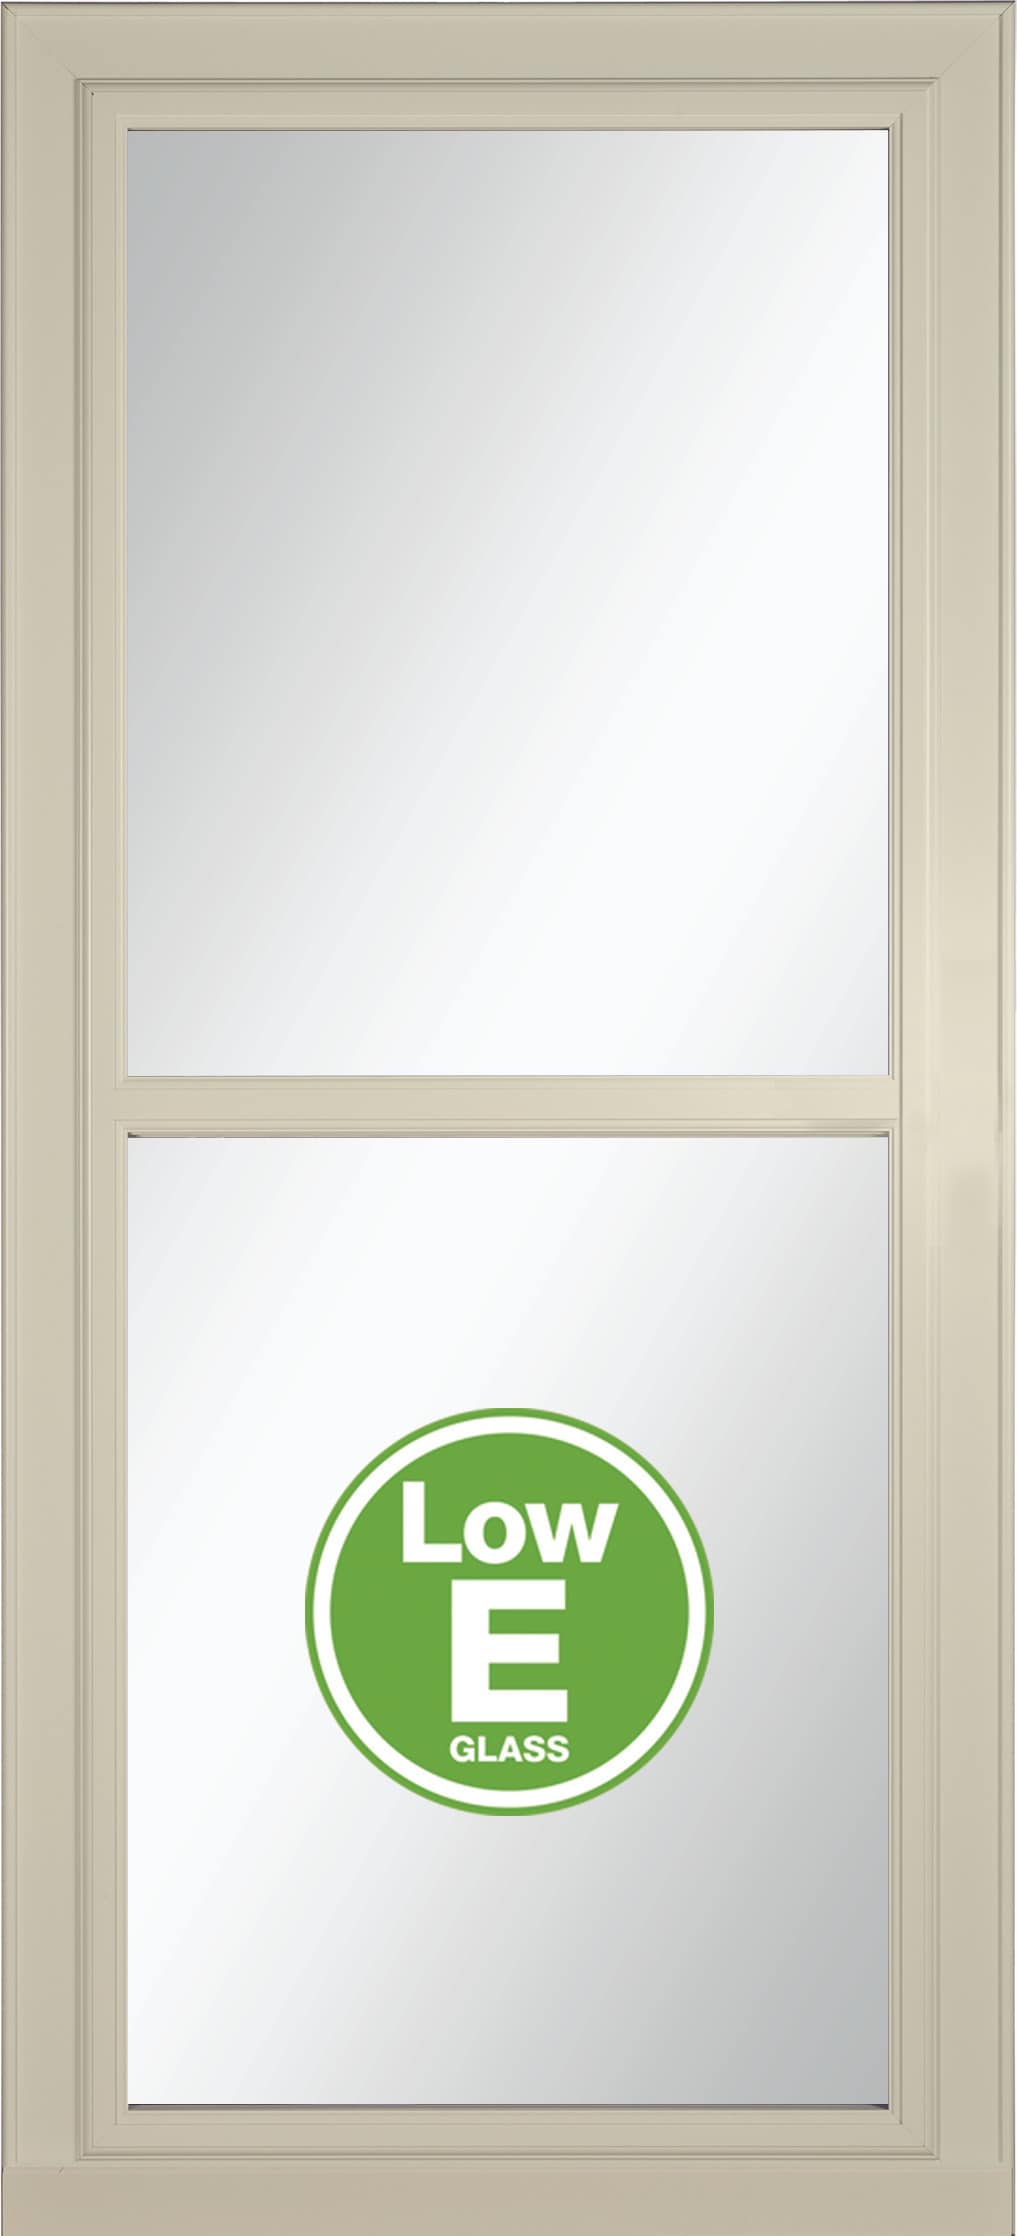 Tradewinds Selection Low-E 36-in x 96-in Almond Full-view Retractable Screen Aluminum Storm Door in Off-White | - LARSON 14604089E